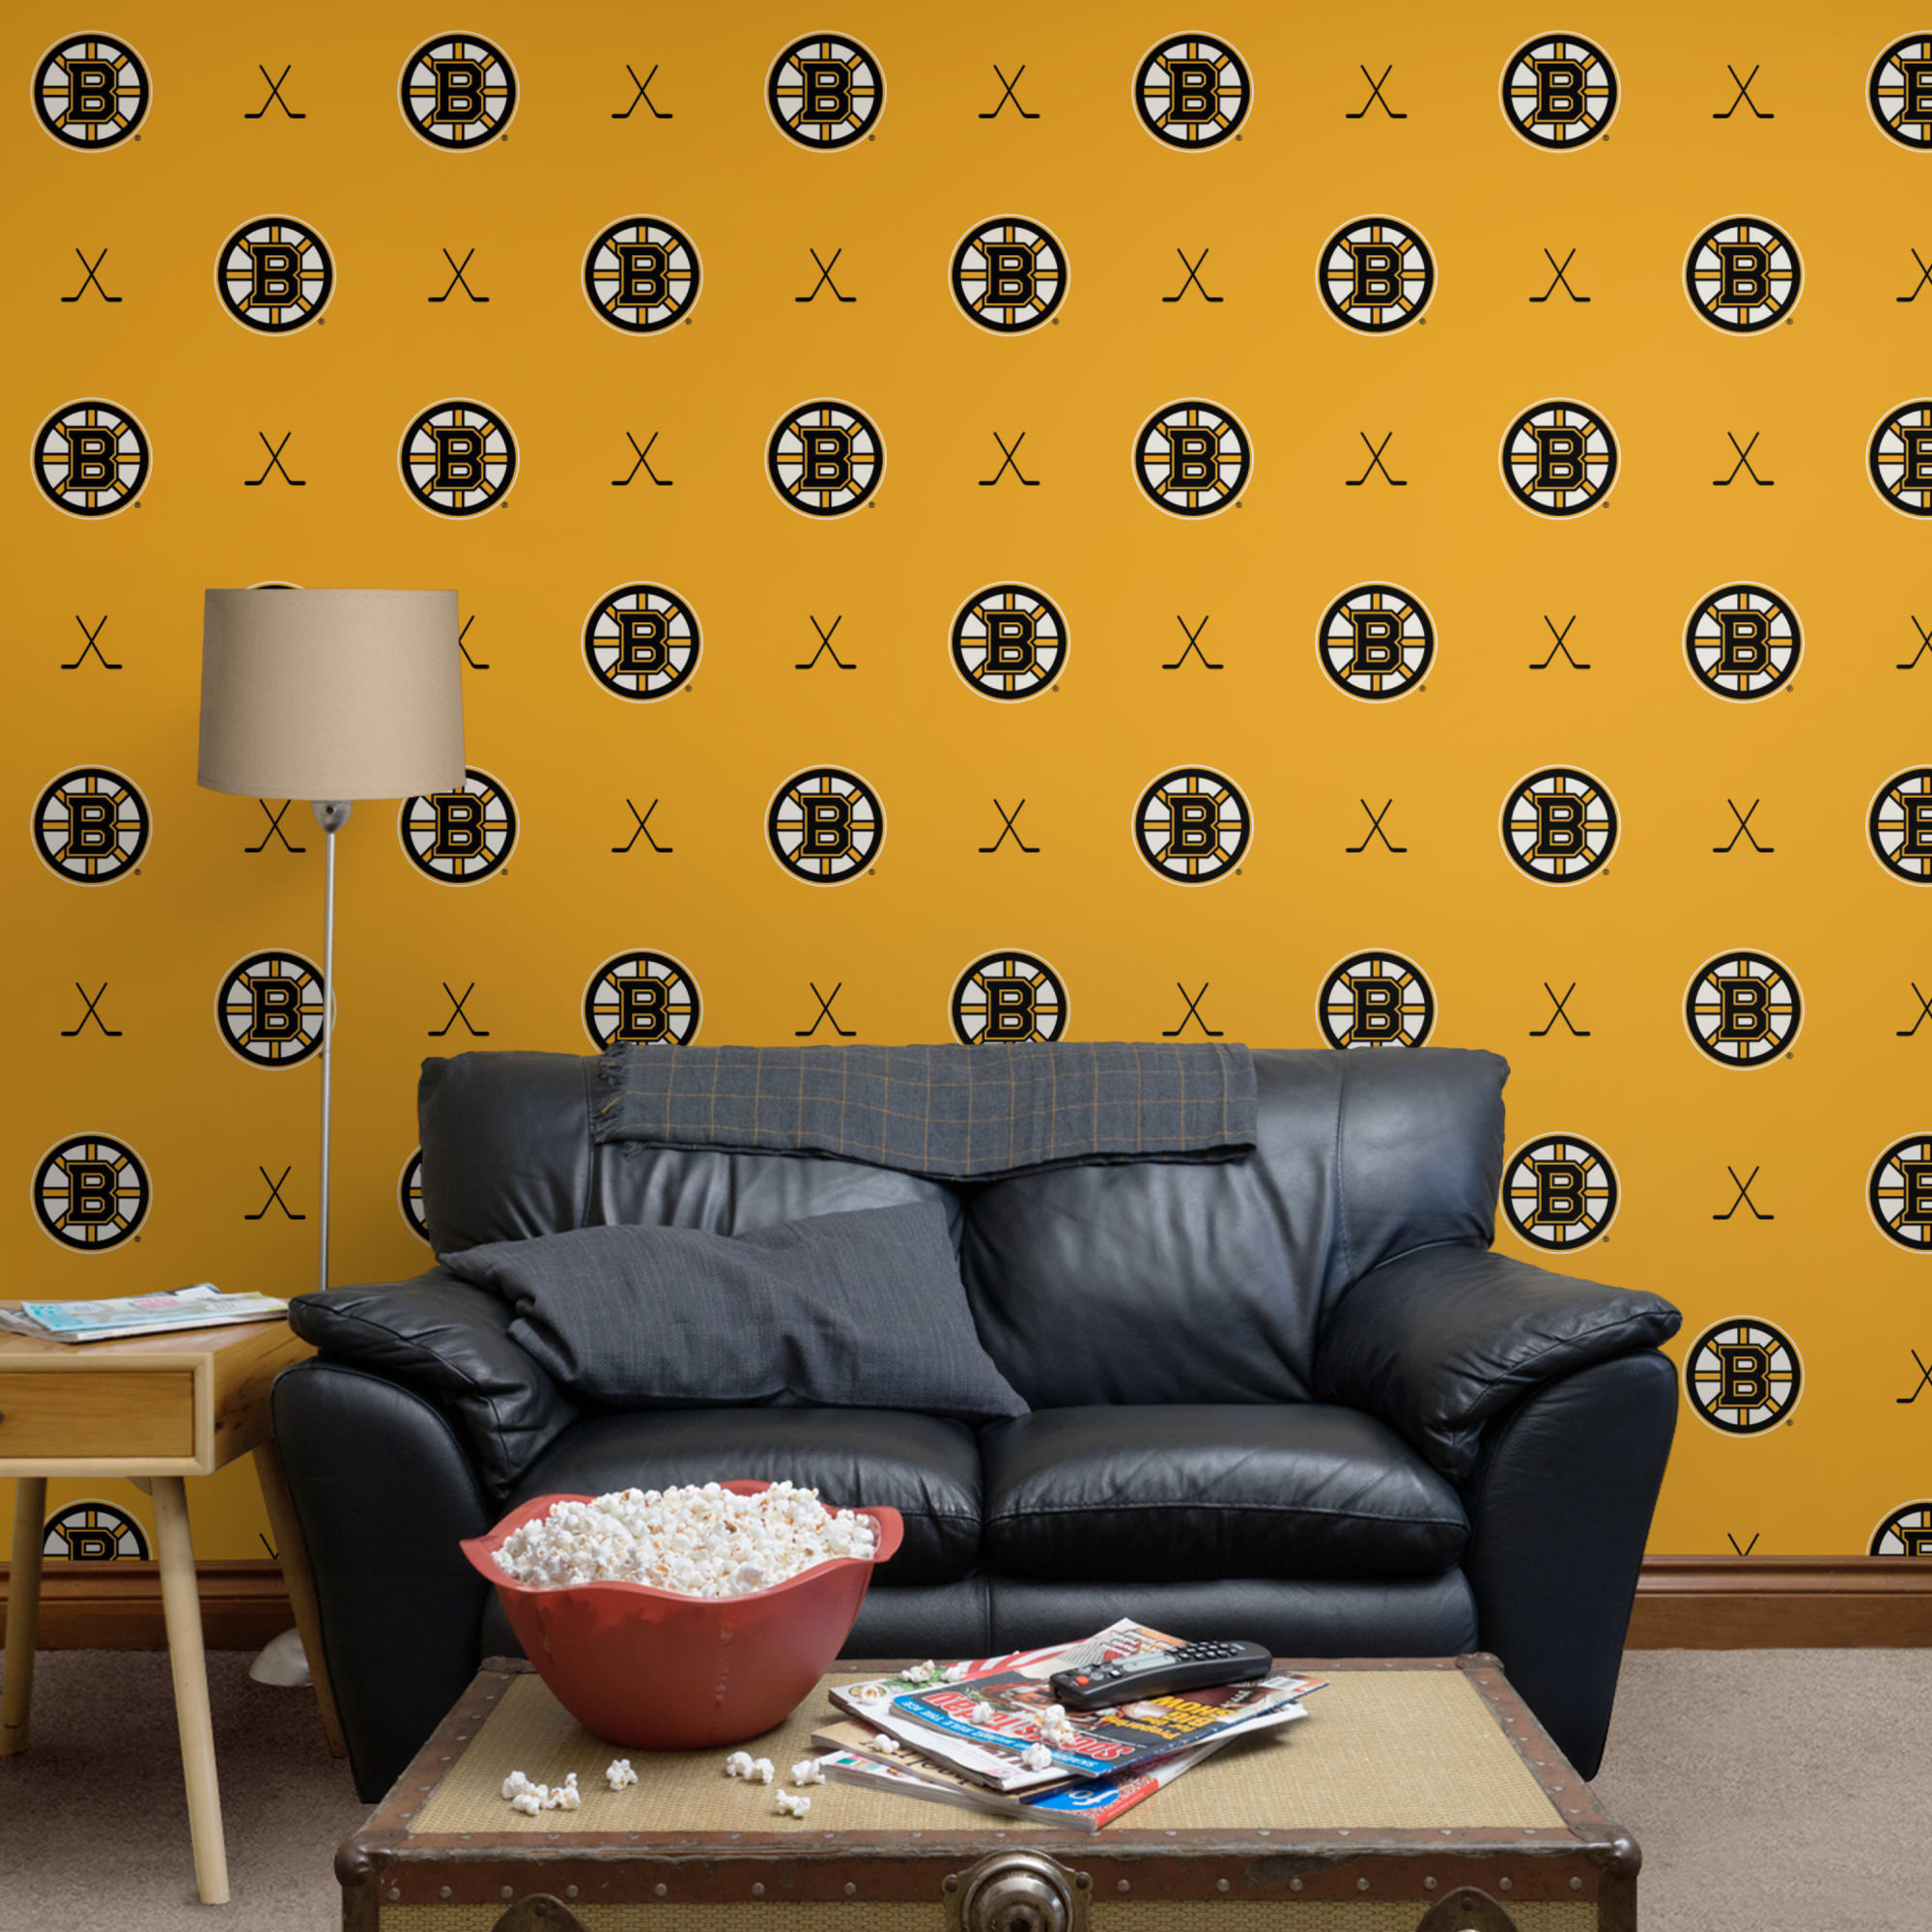 Boston Bruins: Sticks Pattern - Officially Licensed NHL Removable Wallpaper 12" x 12" Sample by Fathead